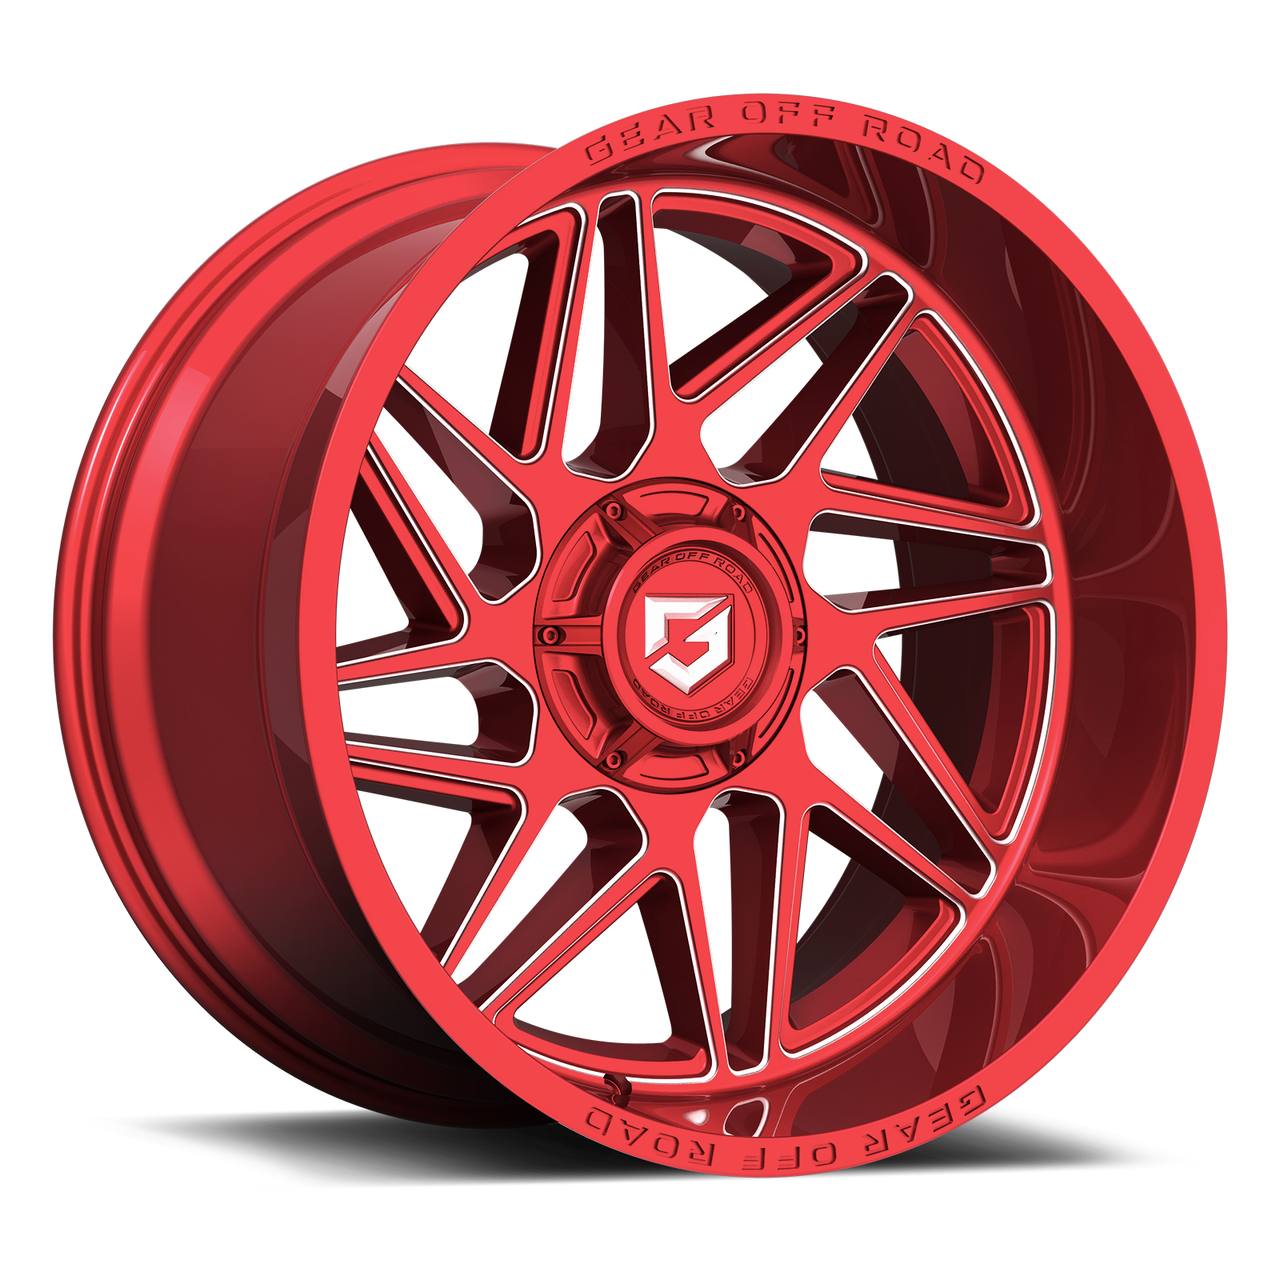 Set 4 20" Gear Off Road 761RM gloss red w/milled accents & lip logo 20x12 Wheels 8x170 -44mm